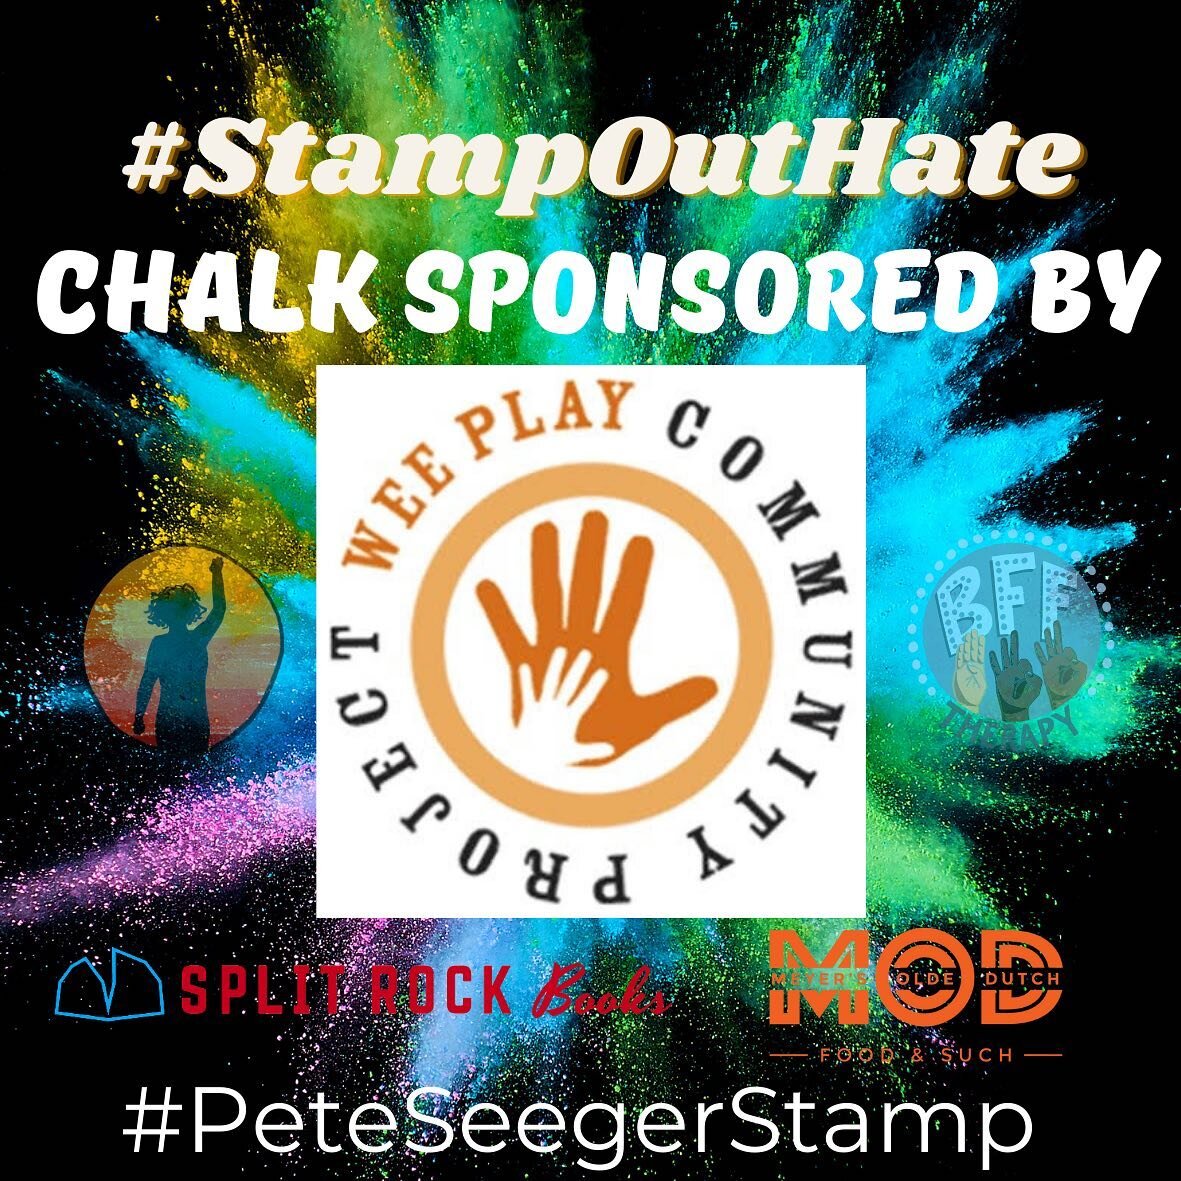 Thank you to our sponsors!!! @weeplayproject is our biggest cheerleader, and I am grateful. I've purchased a lot of chalk in the last few years, and I appreciate the many friends and family members who support me in many ways as this work evolves. Fr